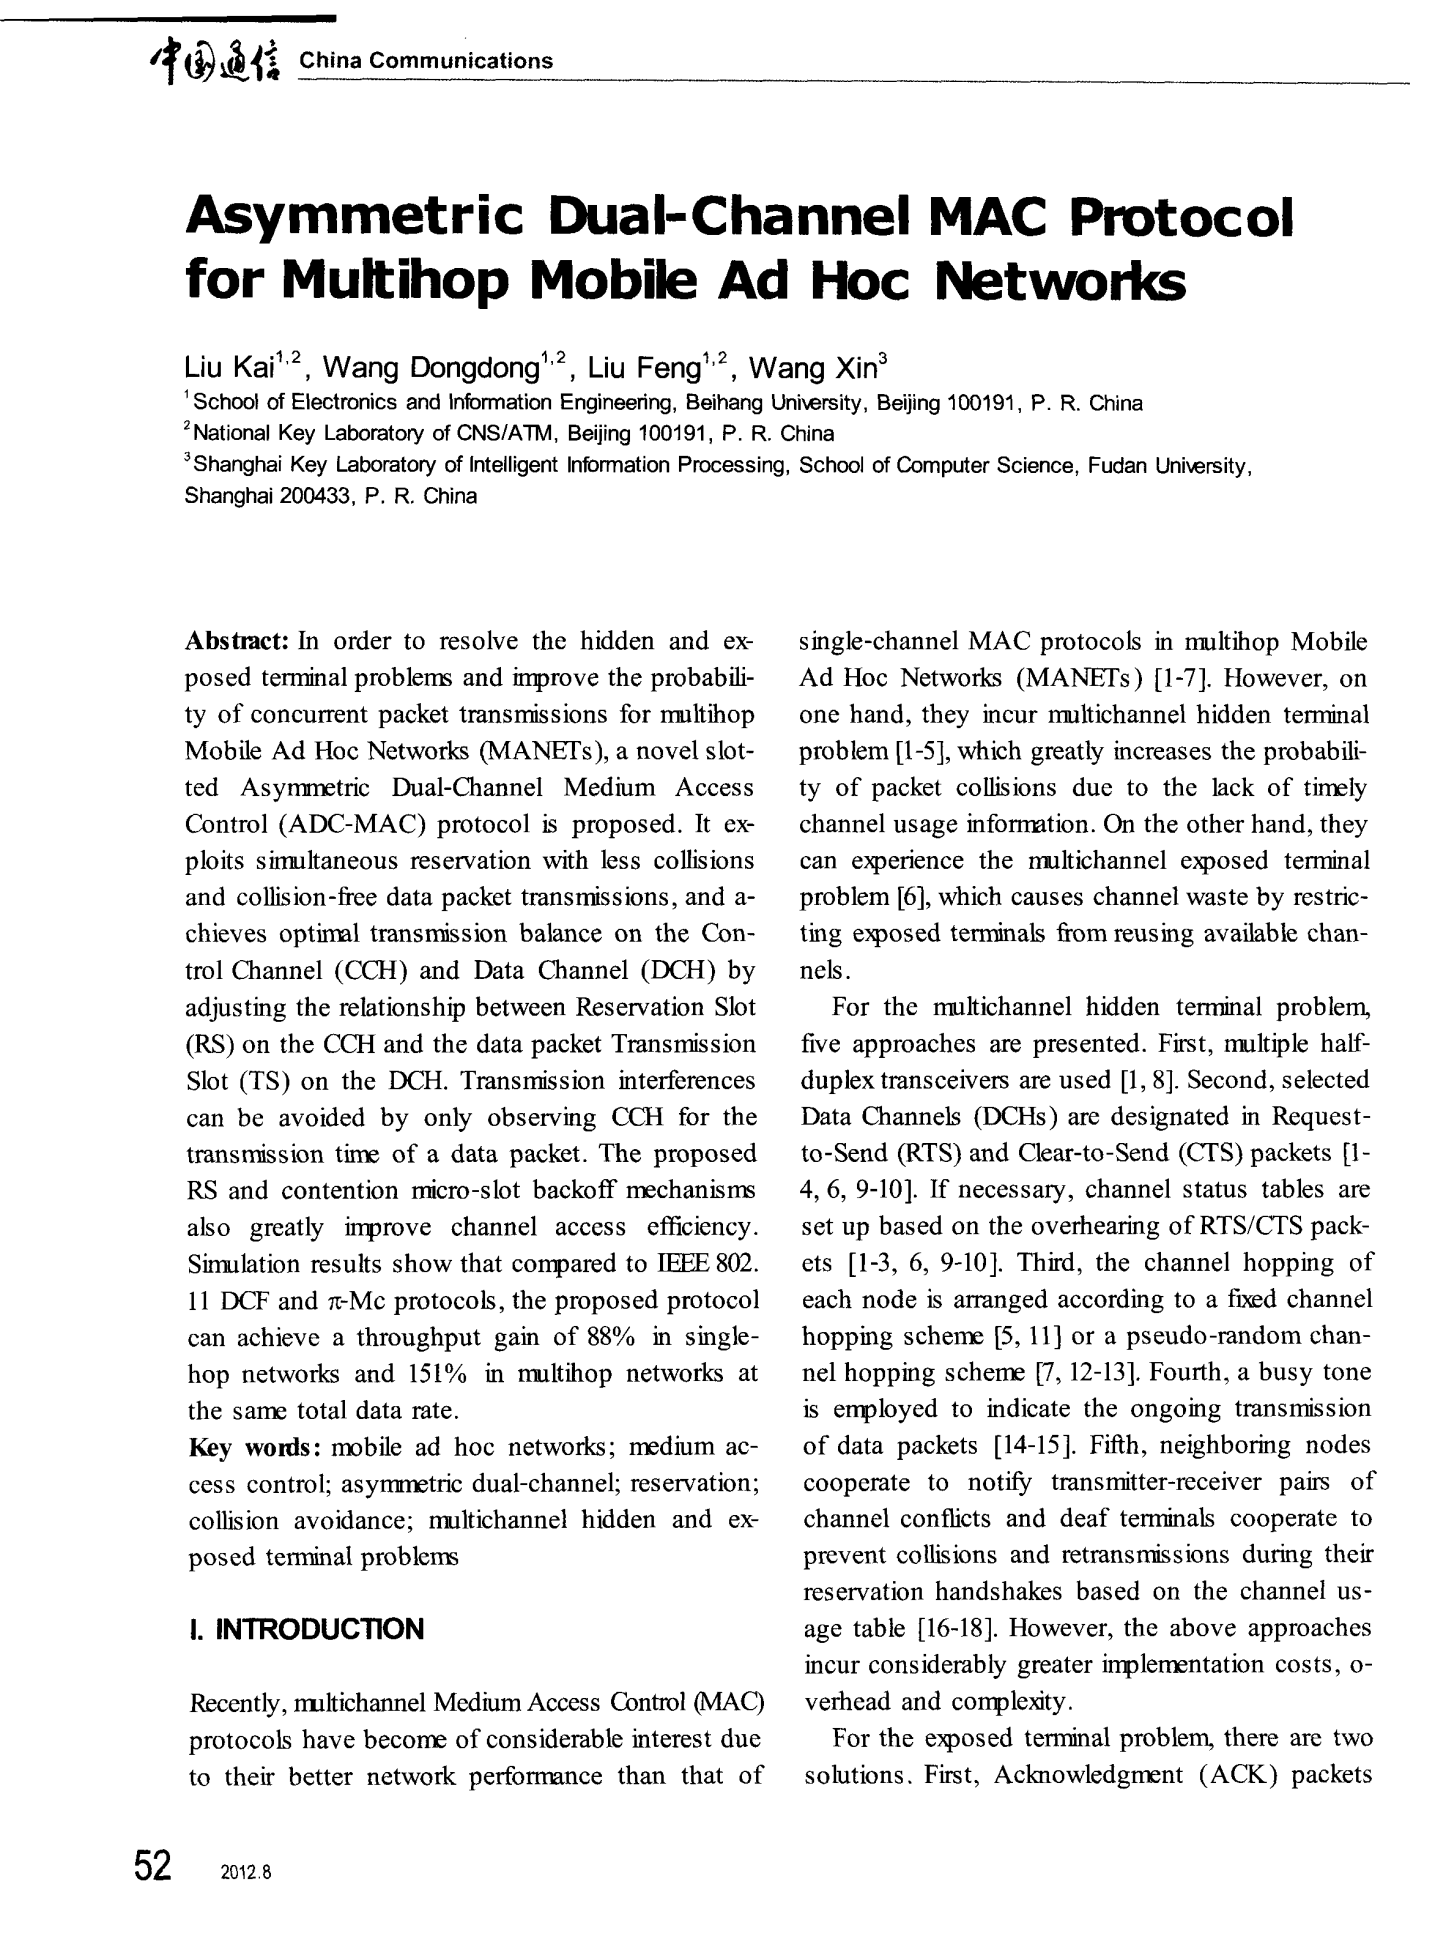 Asymmetric Dual-Channel MAC Protocol for Multihop Mobile Ad Hoc Networks